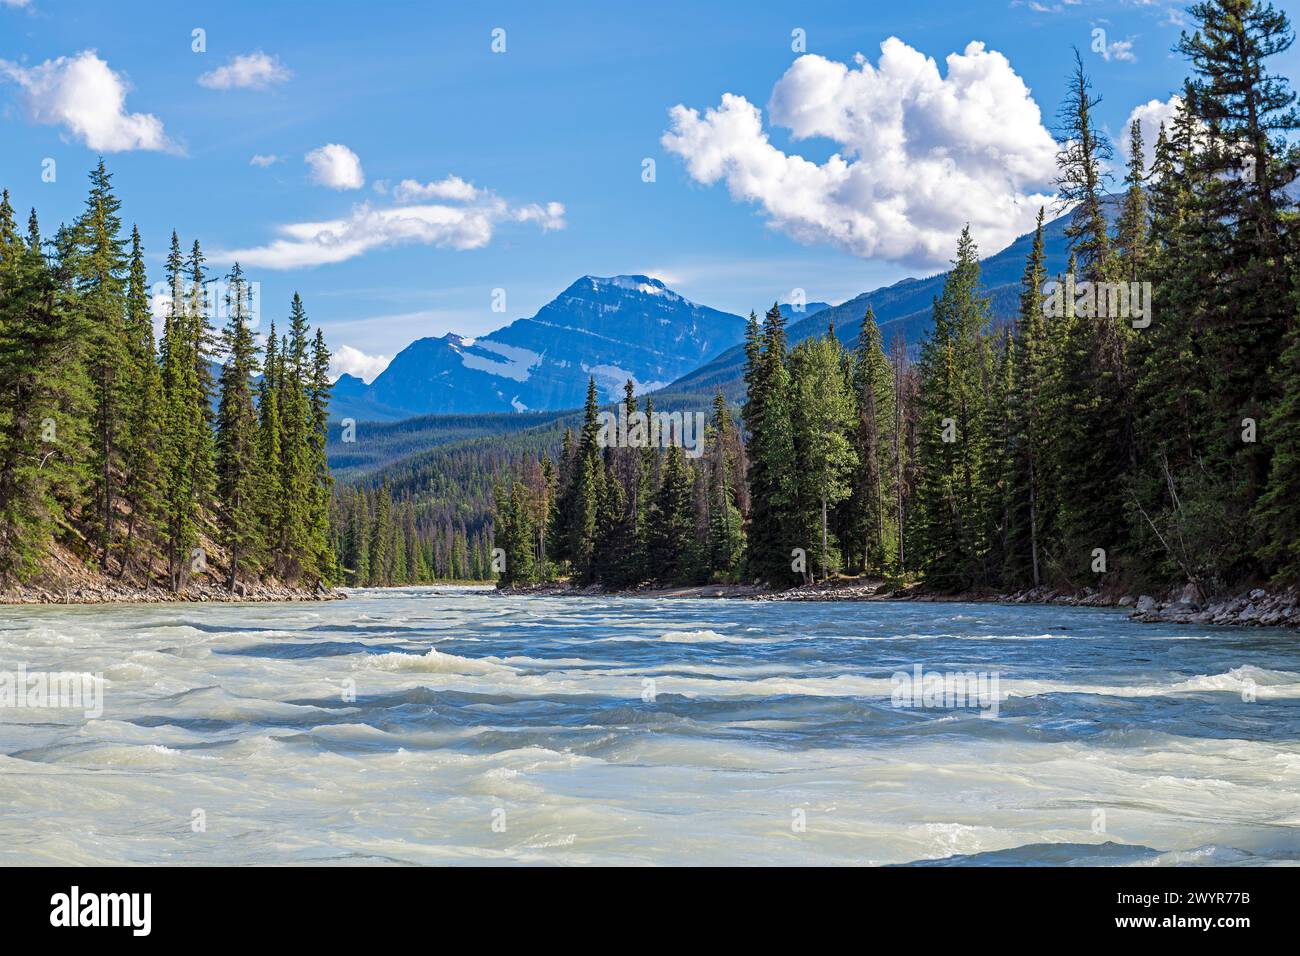 Athabasca river landscape during rafting excursion, Jasper national Park, Canada. Stock Photo